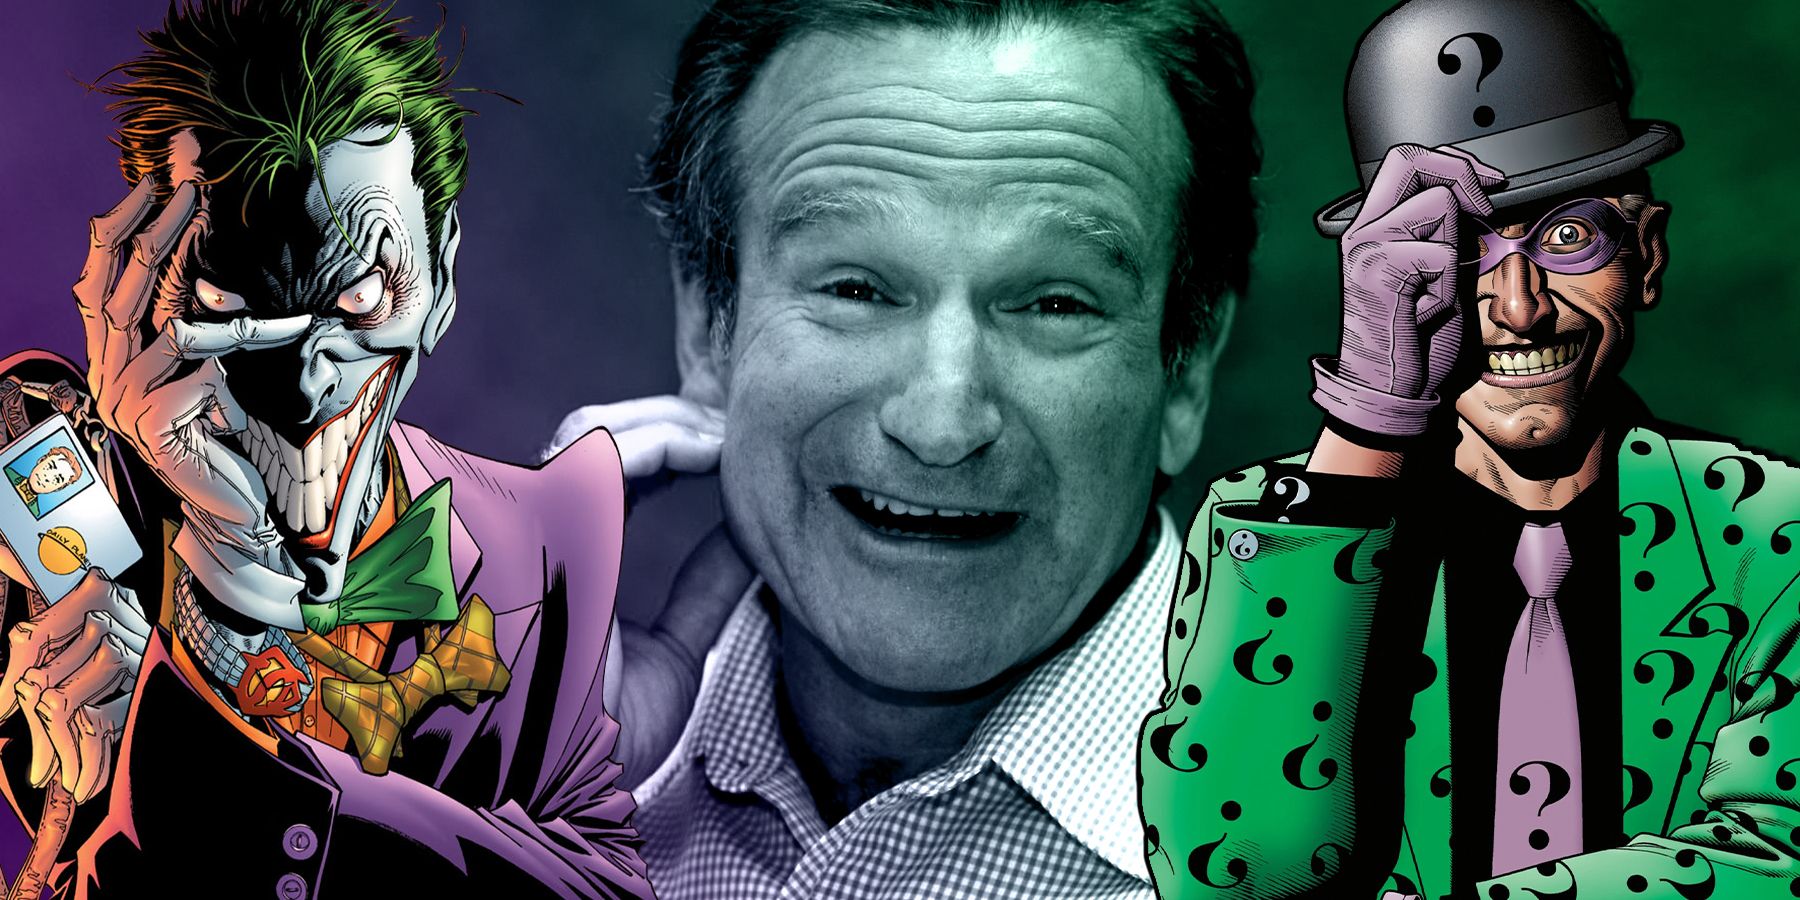 Robin Williams Almost Played Joker and Riddler Two Iconic Batman Villains